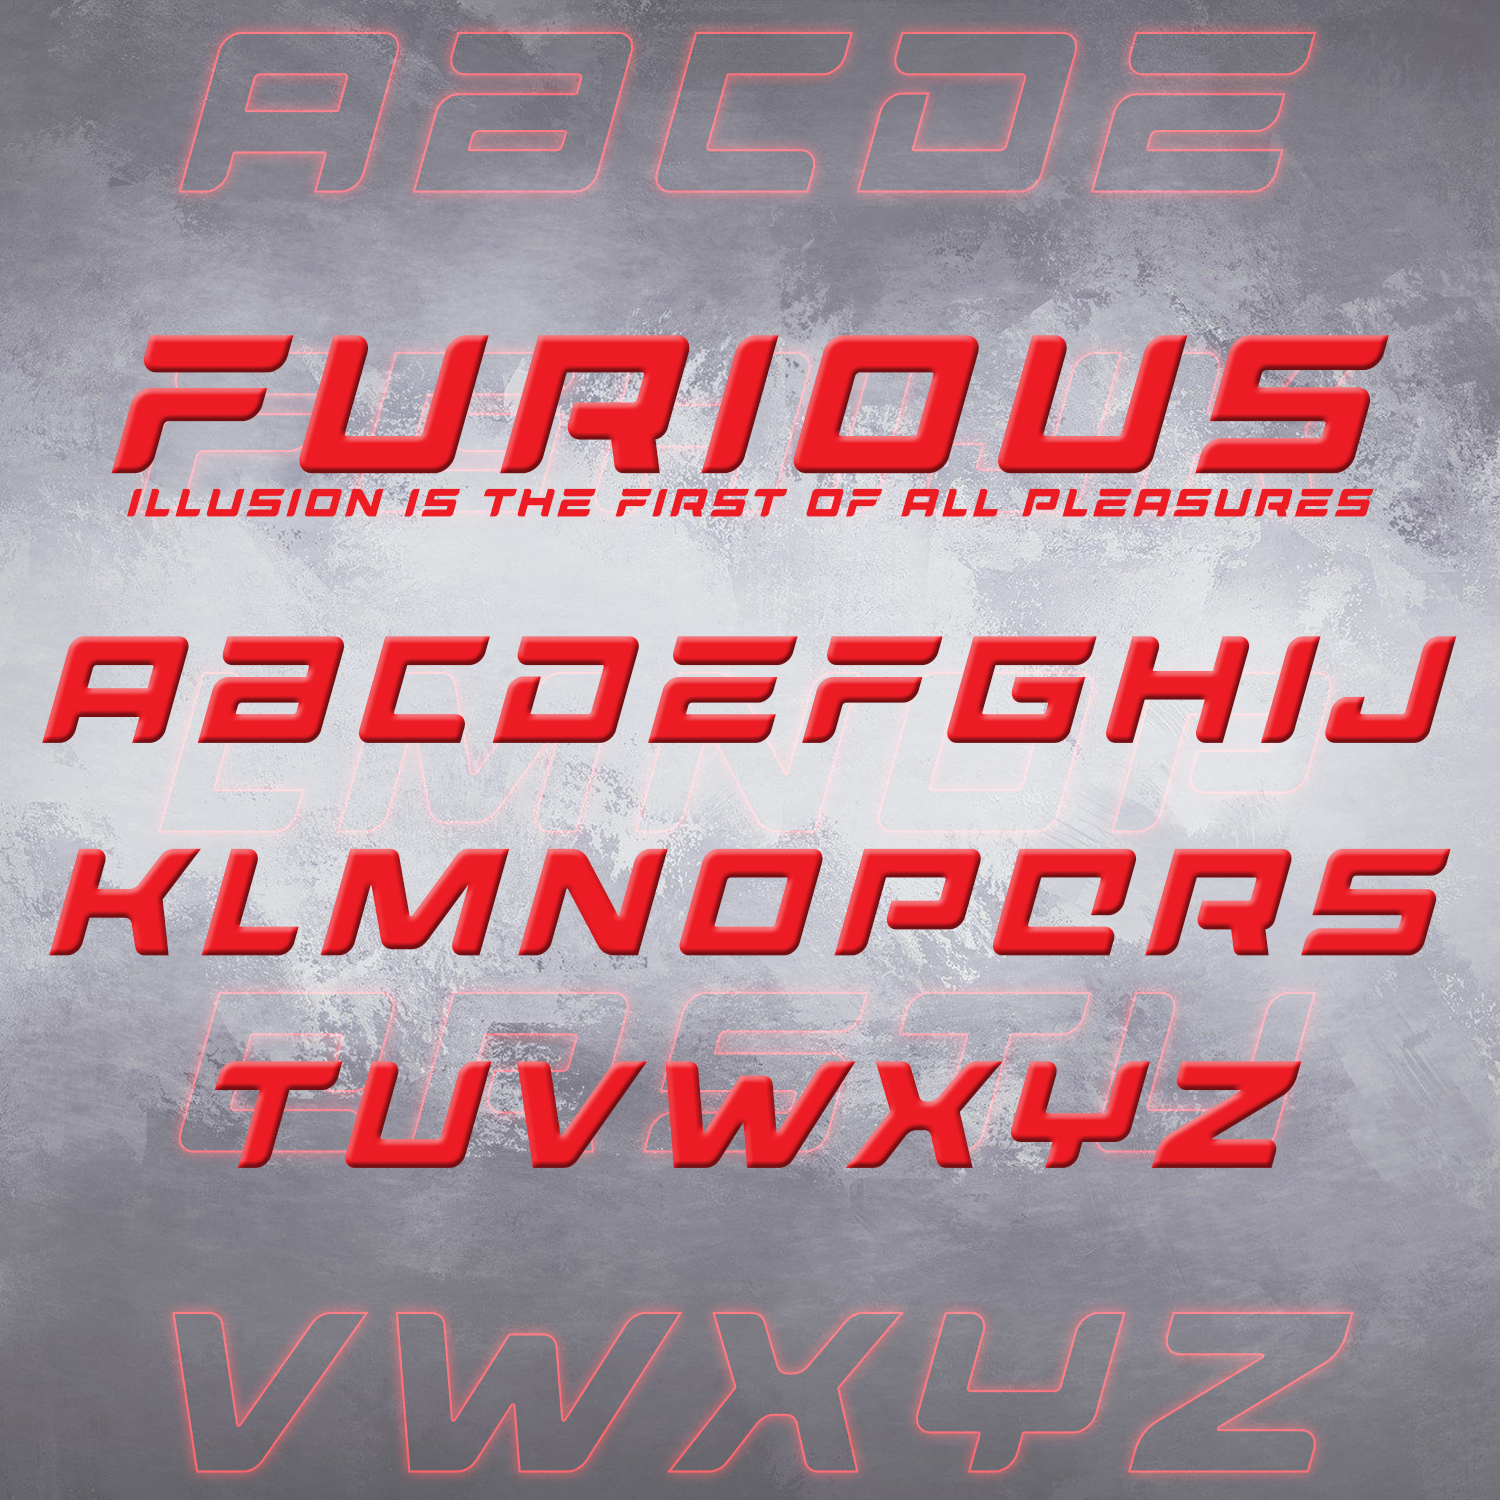 The title of the font pack.